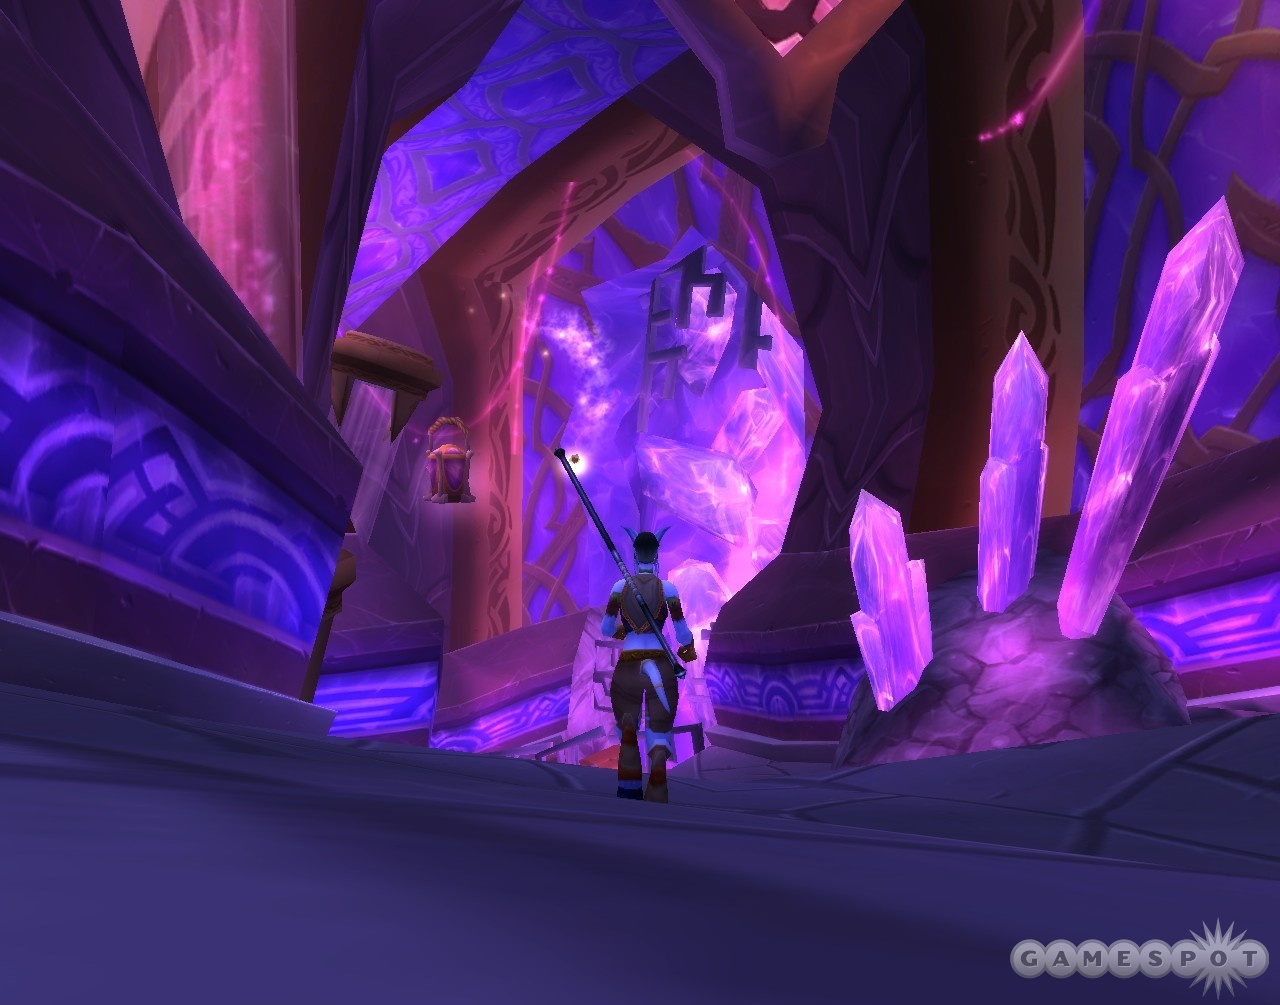 The Exodar is pretty, but it’s a long ways away from most of civilization.